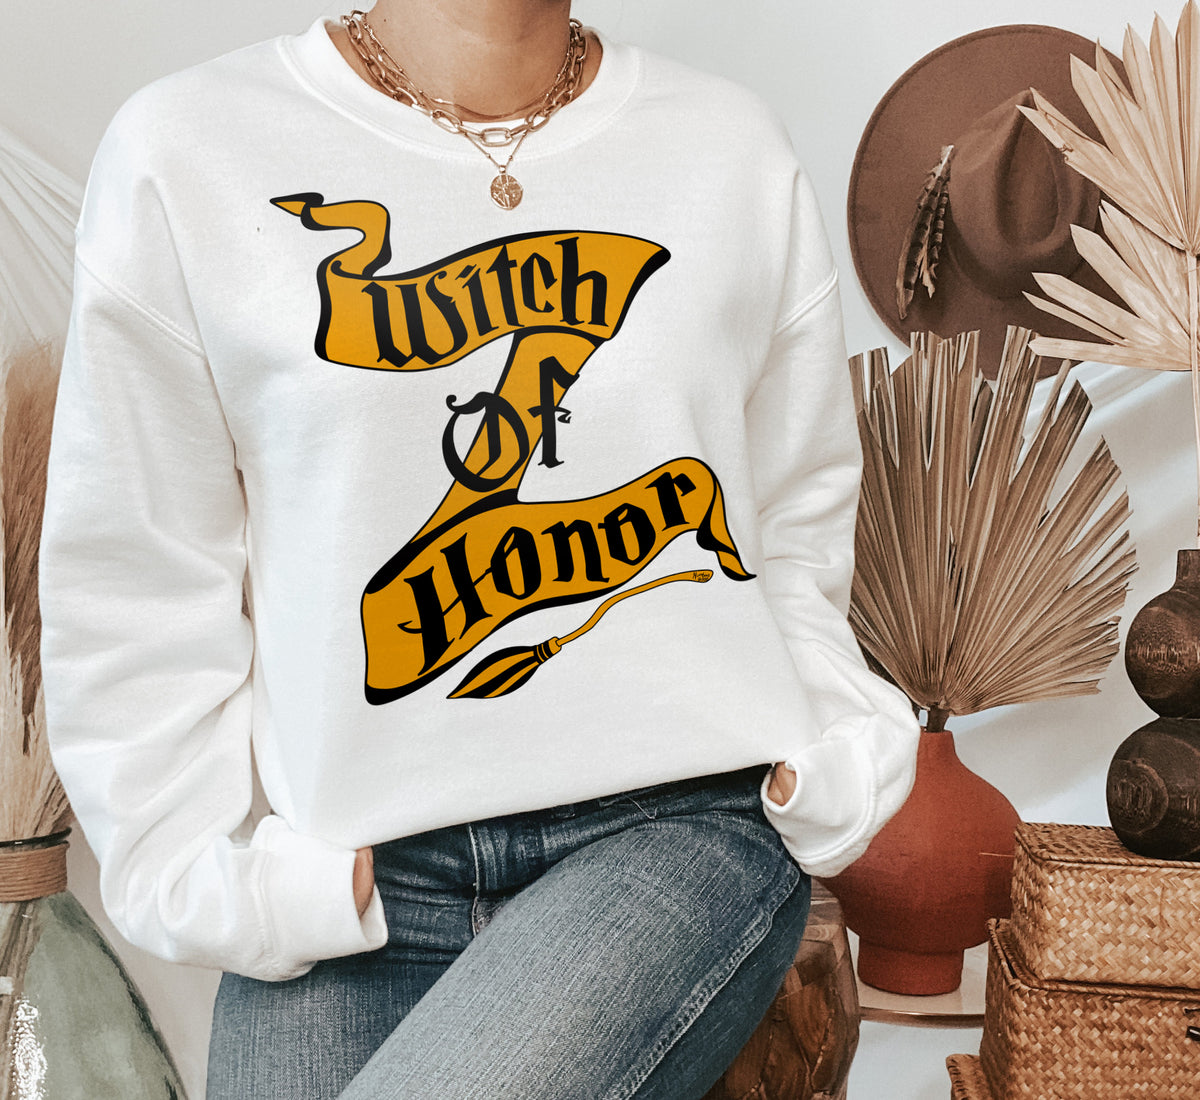 White sweater saying witch of honor - HighCiti